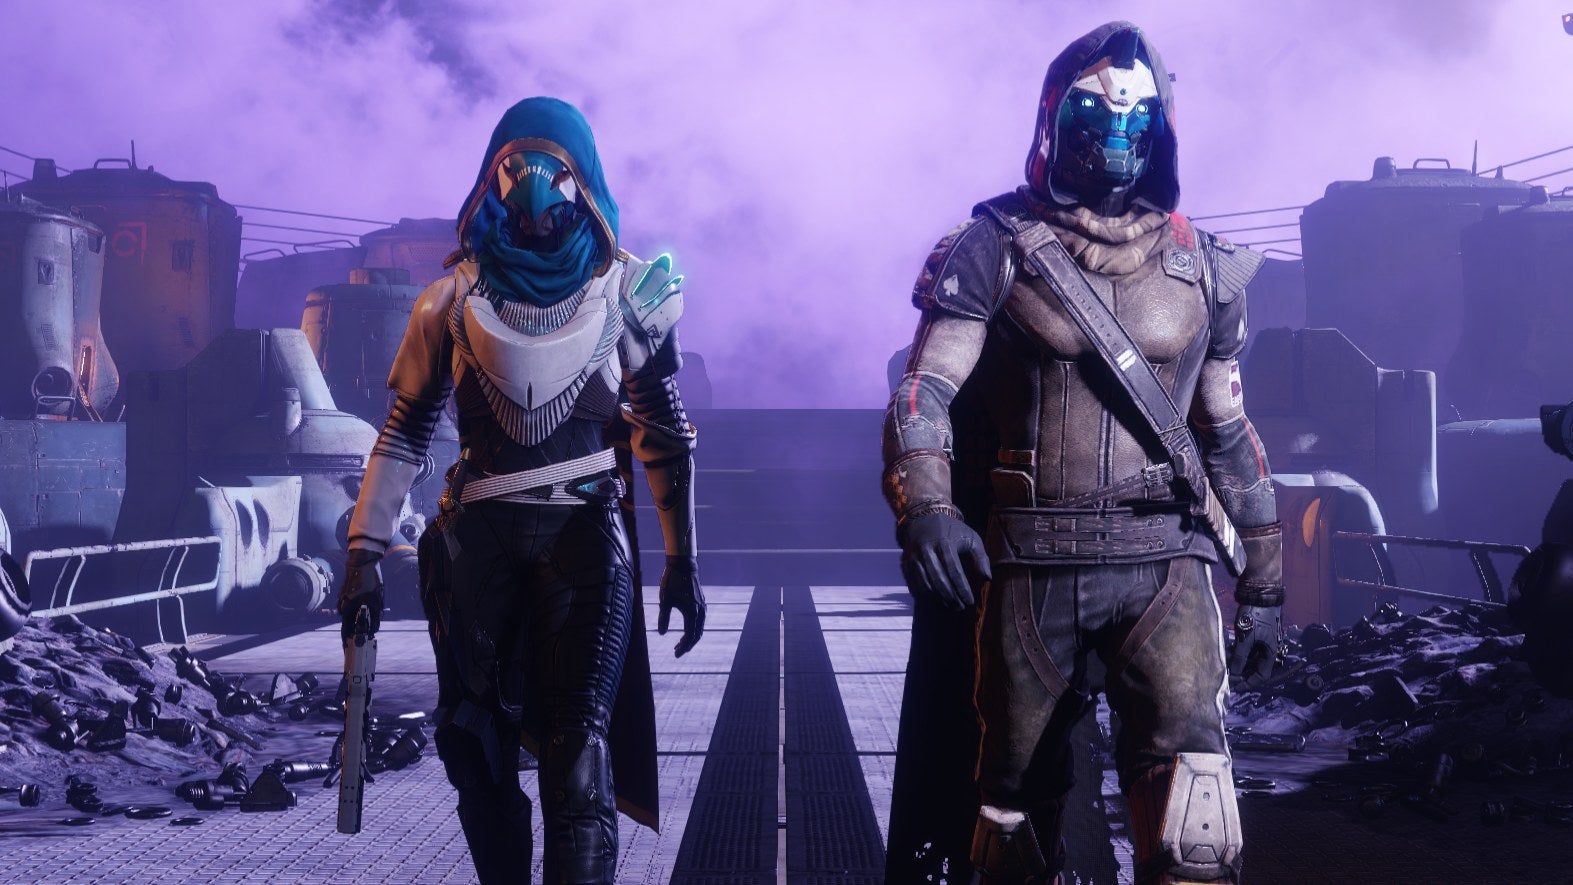 My Hunter and Cayde-6 strolling into the Prison of Elders in a Destiny 2 screenshot.